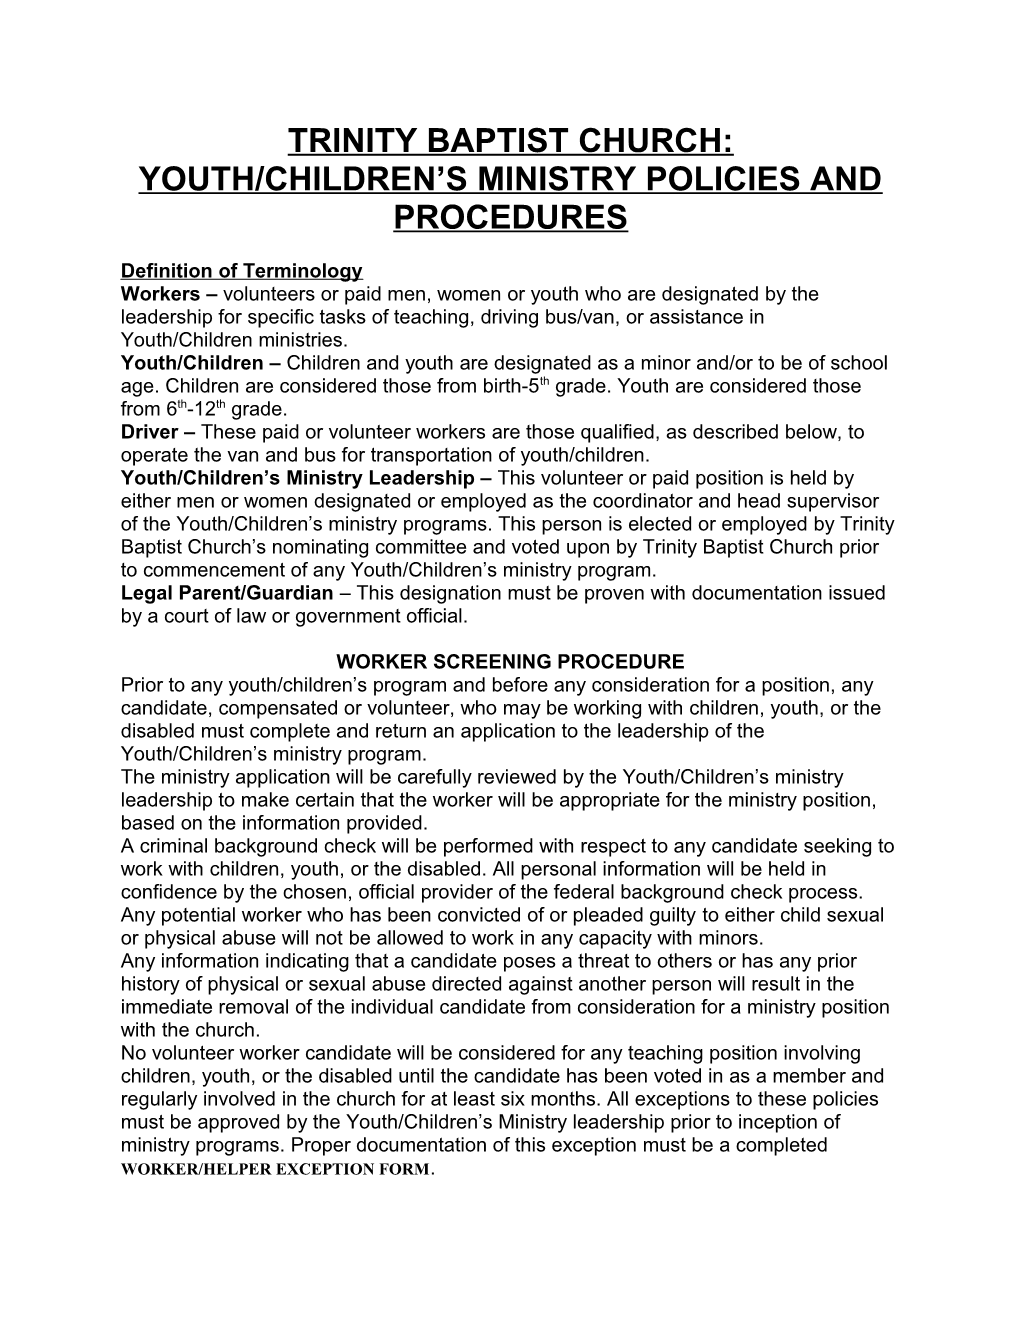 Trinity Baptist Church: Youth/Children S Ministry Policies and Procedures